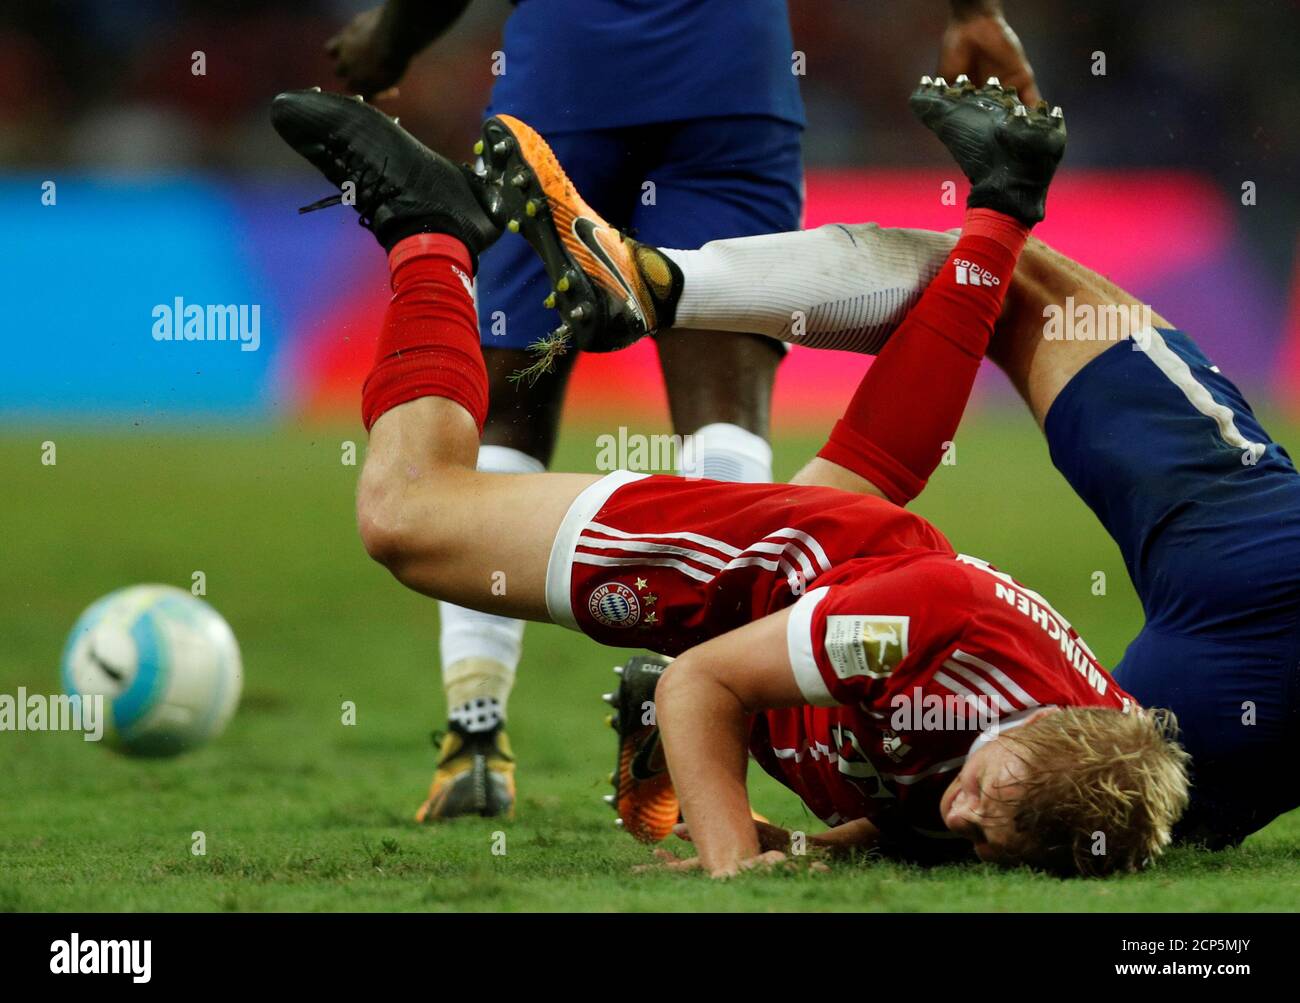 Football Soccer - Chelsea v Bayern Munich - International Champions Cup Singapore - National Stadium, Singapore - July 25, 2017 -  Bayern Munich's Felix Gotze falls after a tackle. REUTERS/Edgar Su Stock Photo